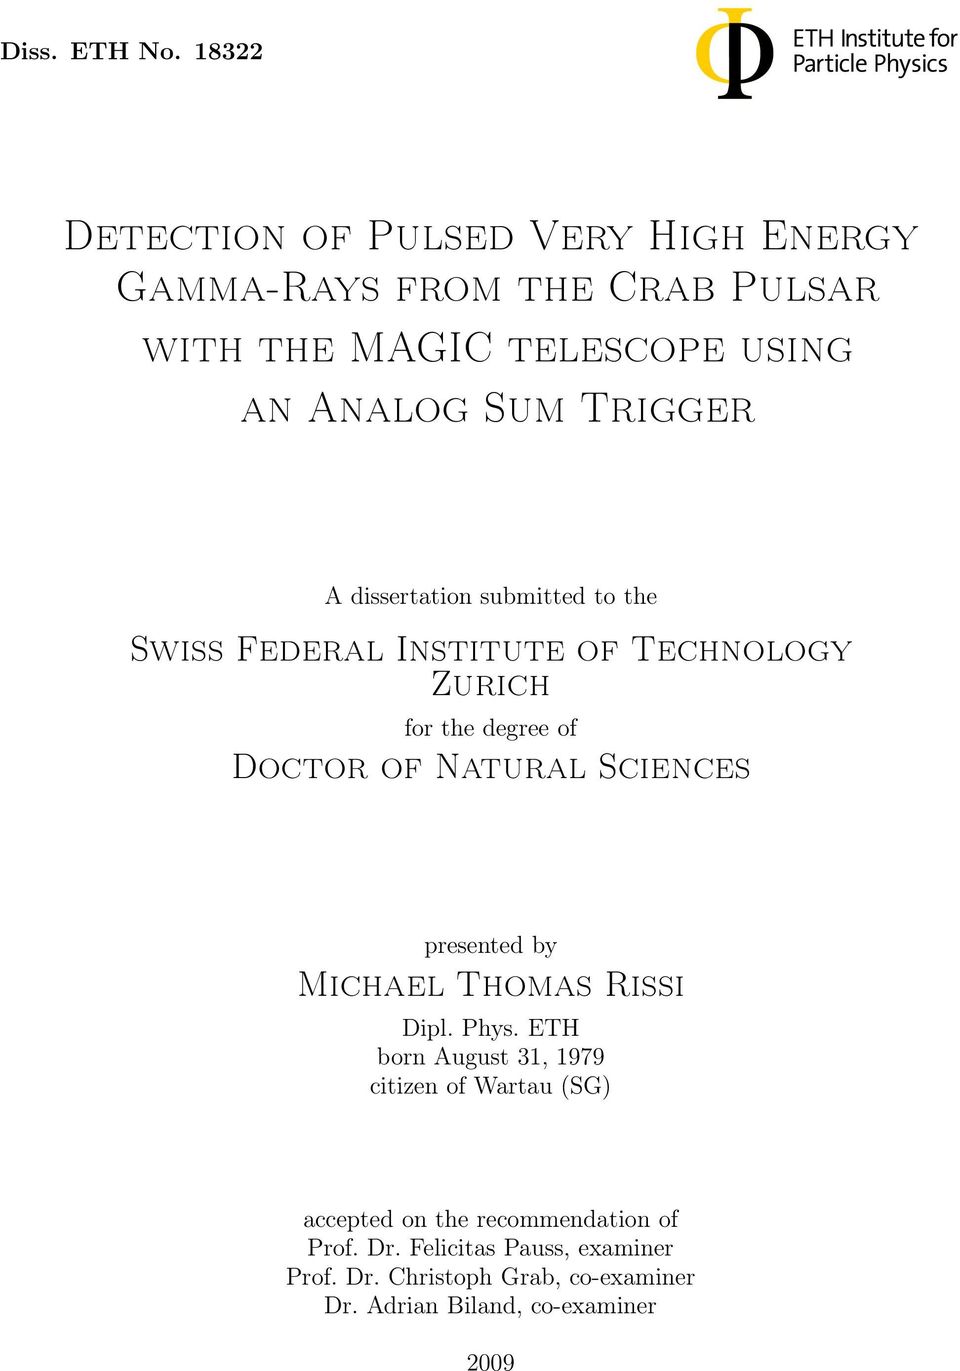 Trigger A dissertation submitted to the Swiss Federal Institute of Technology Zurich for the degree of Doctor of Natural